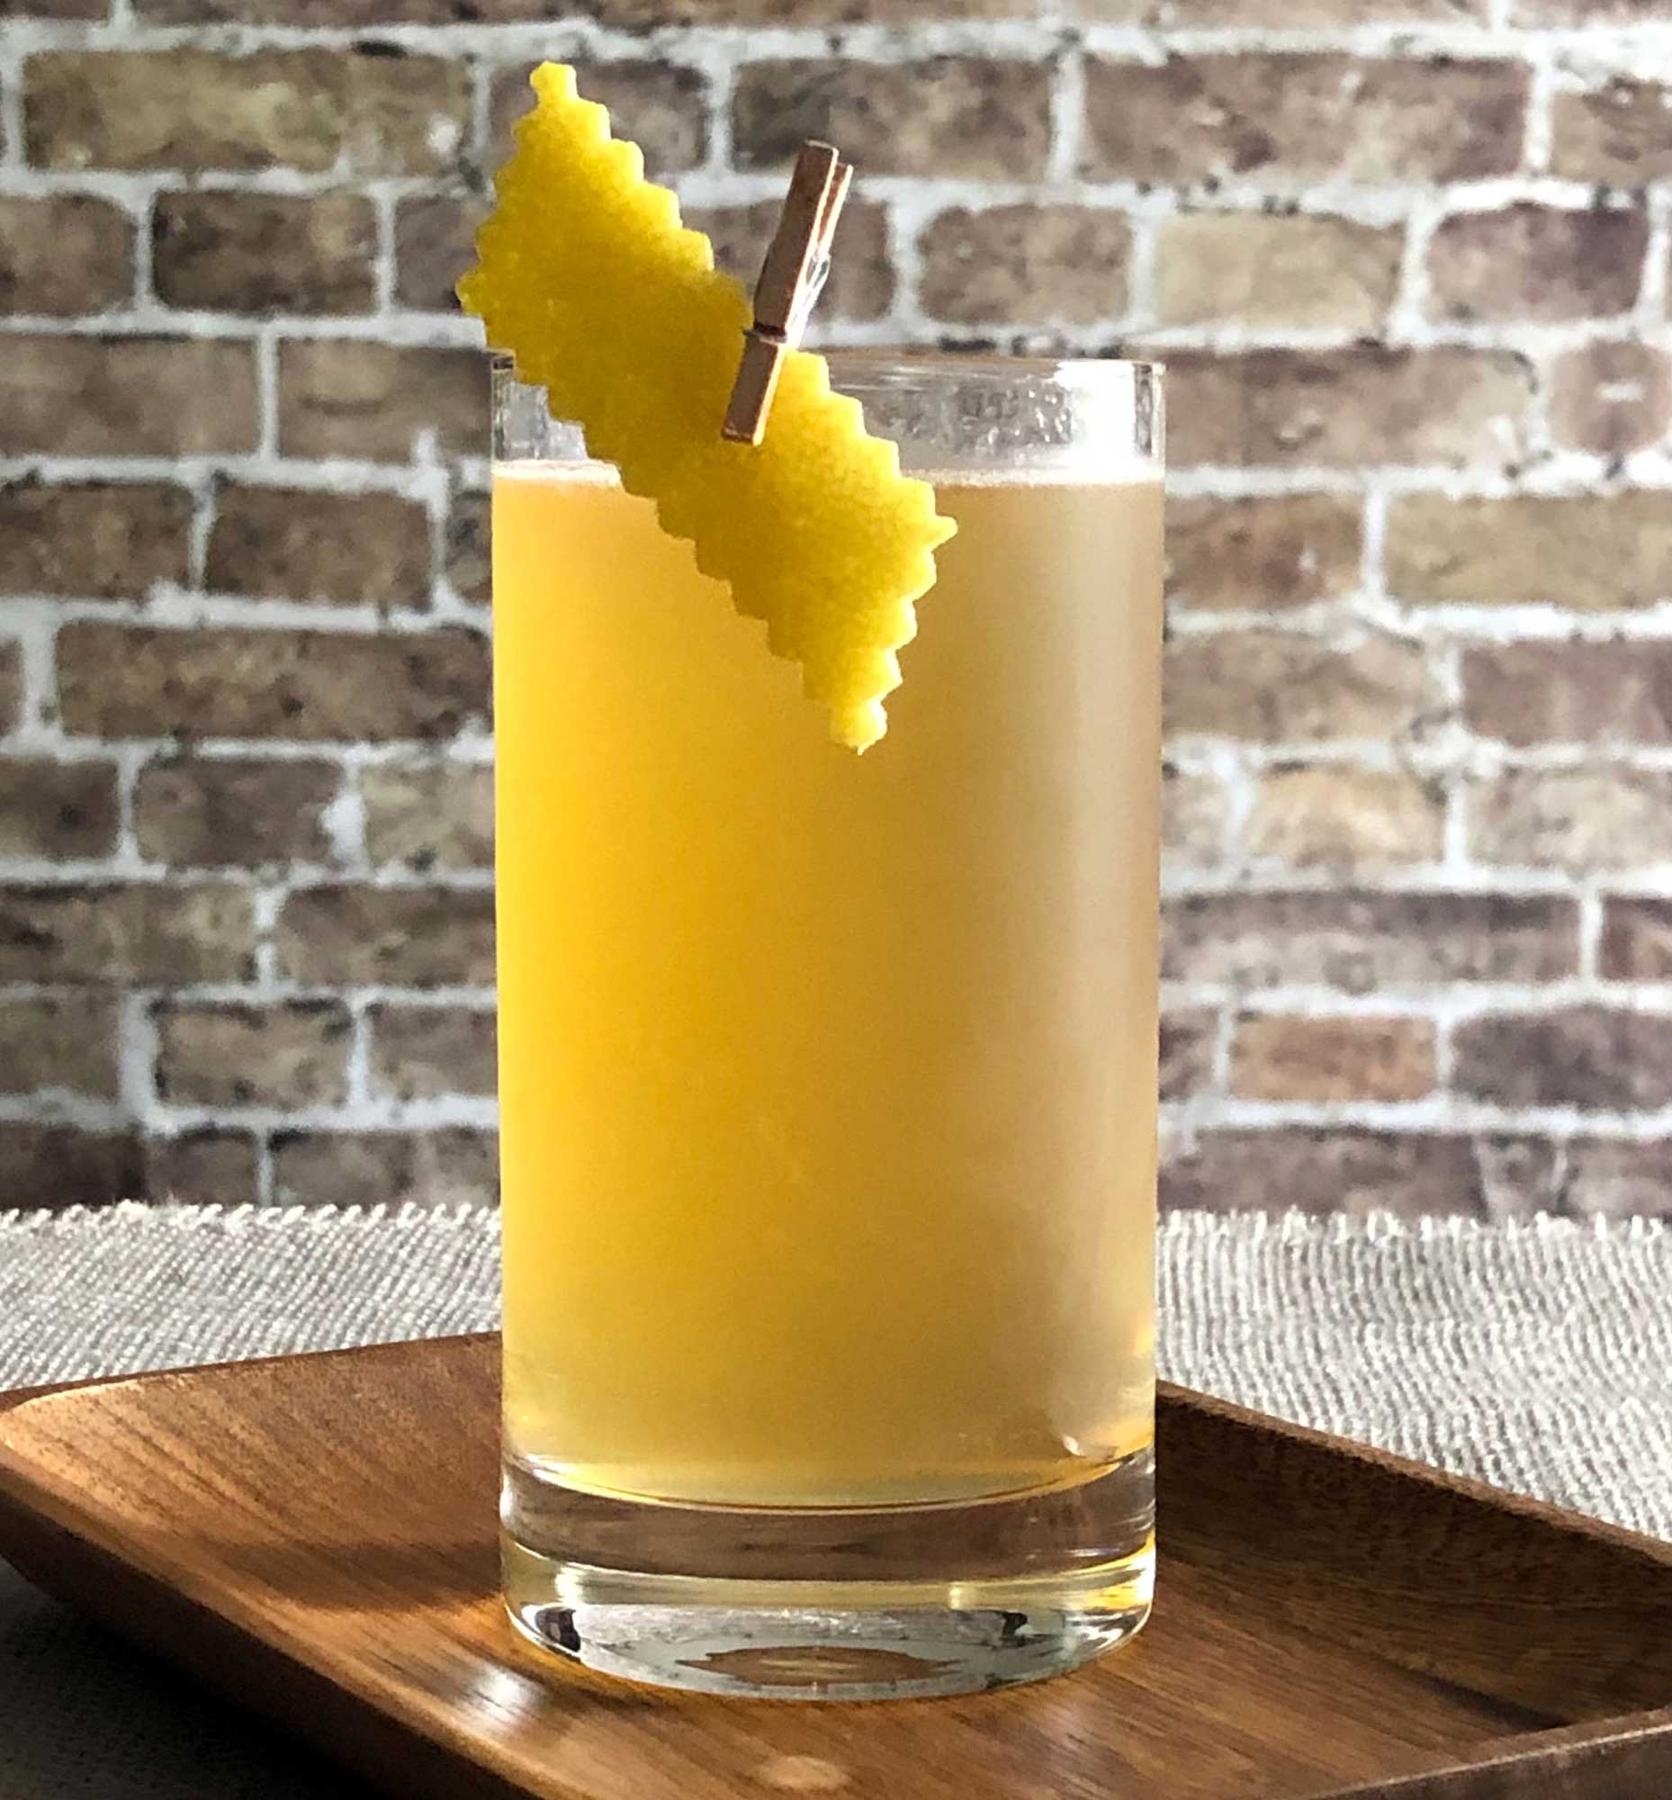 An example of the Apricot Beer Collins, the mixed drink (drink) featuring white beer, Hayman’s Old Tom Gin, Rothman & Winter Orchard Apricot Liqueur, lemon juice, and lemon twist; photo by Lee Edwards